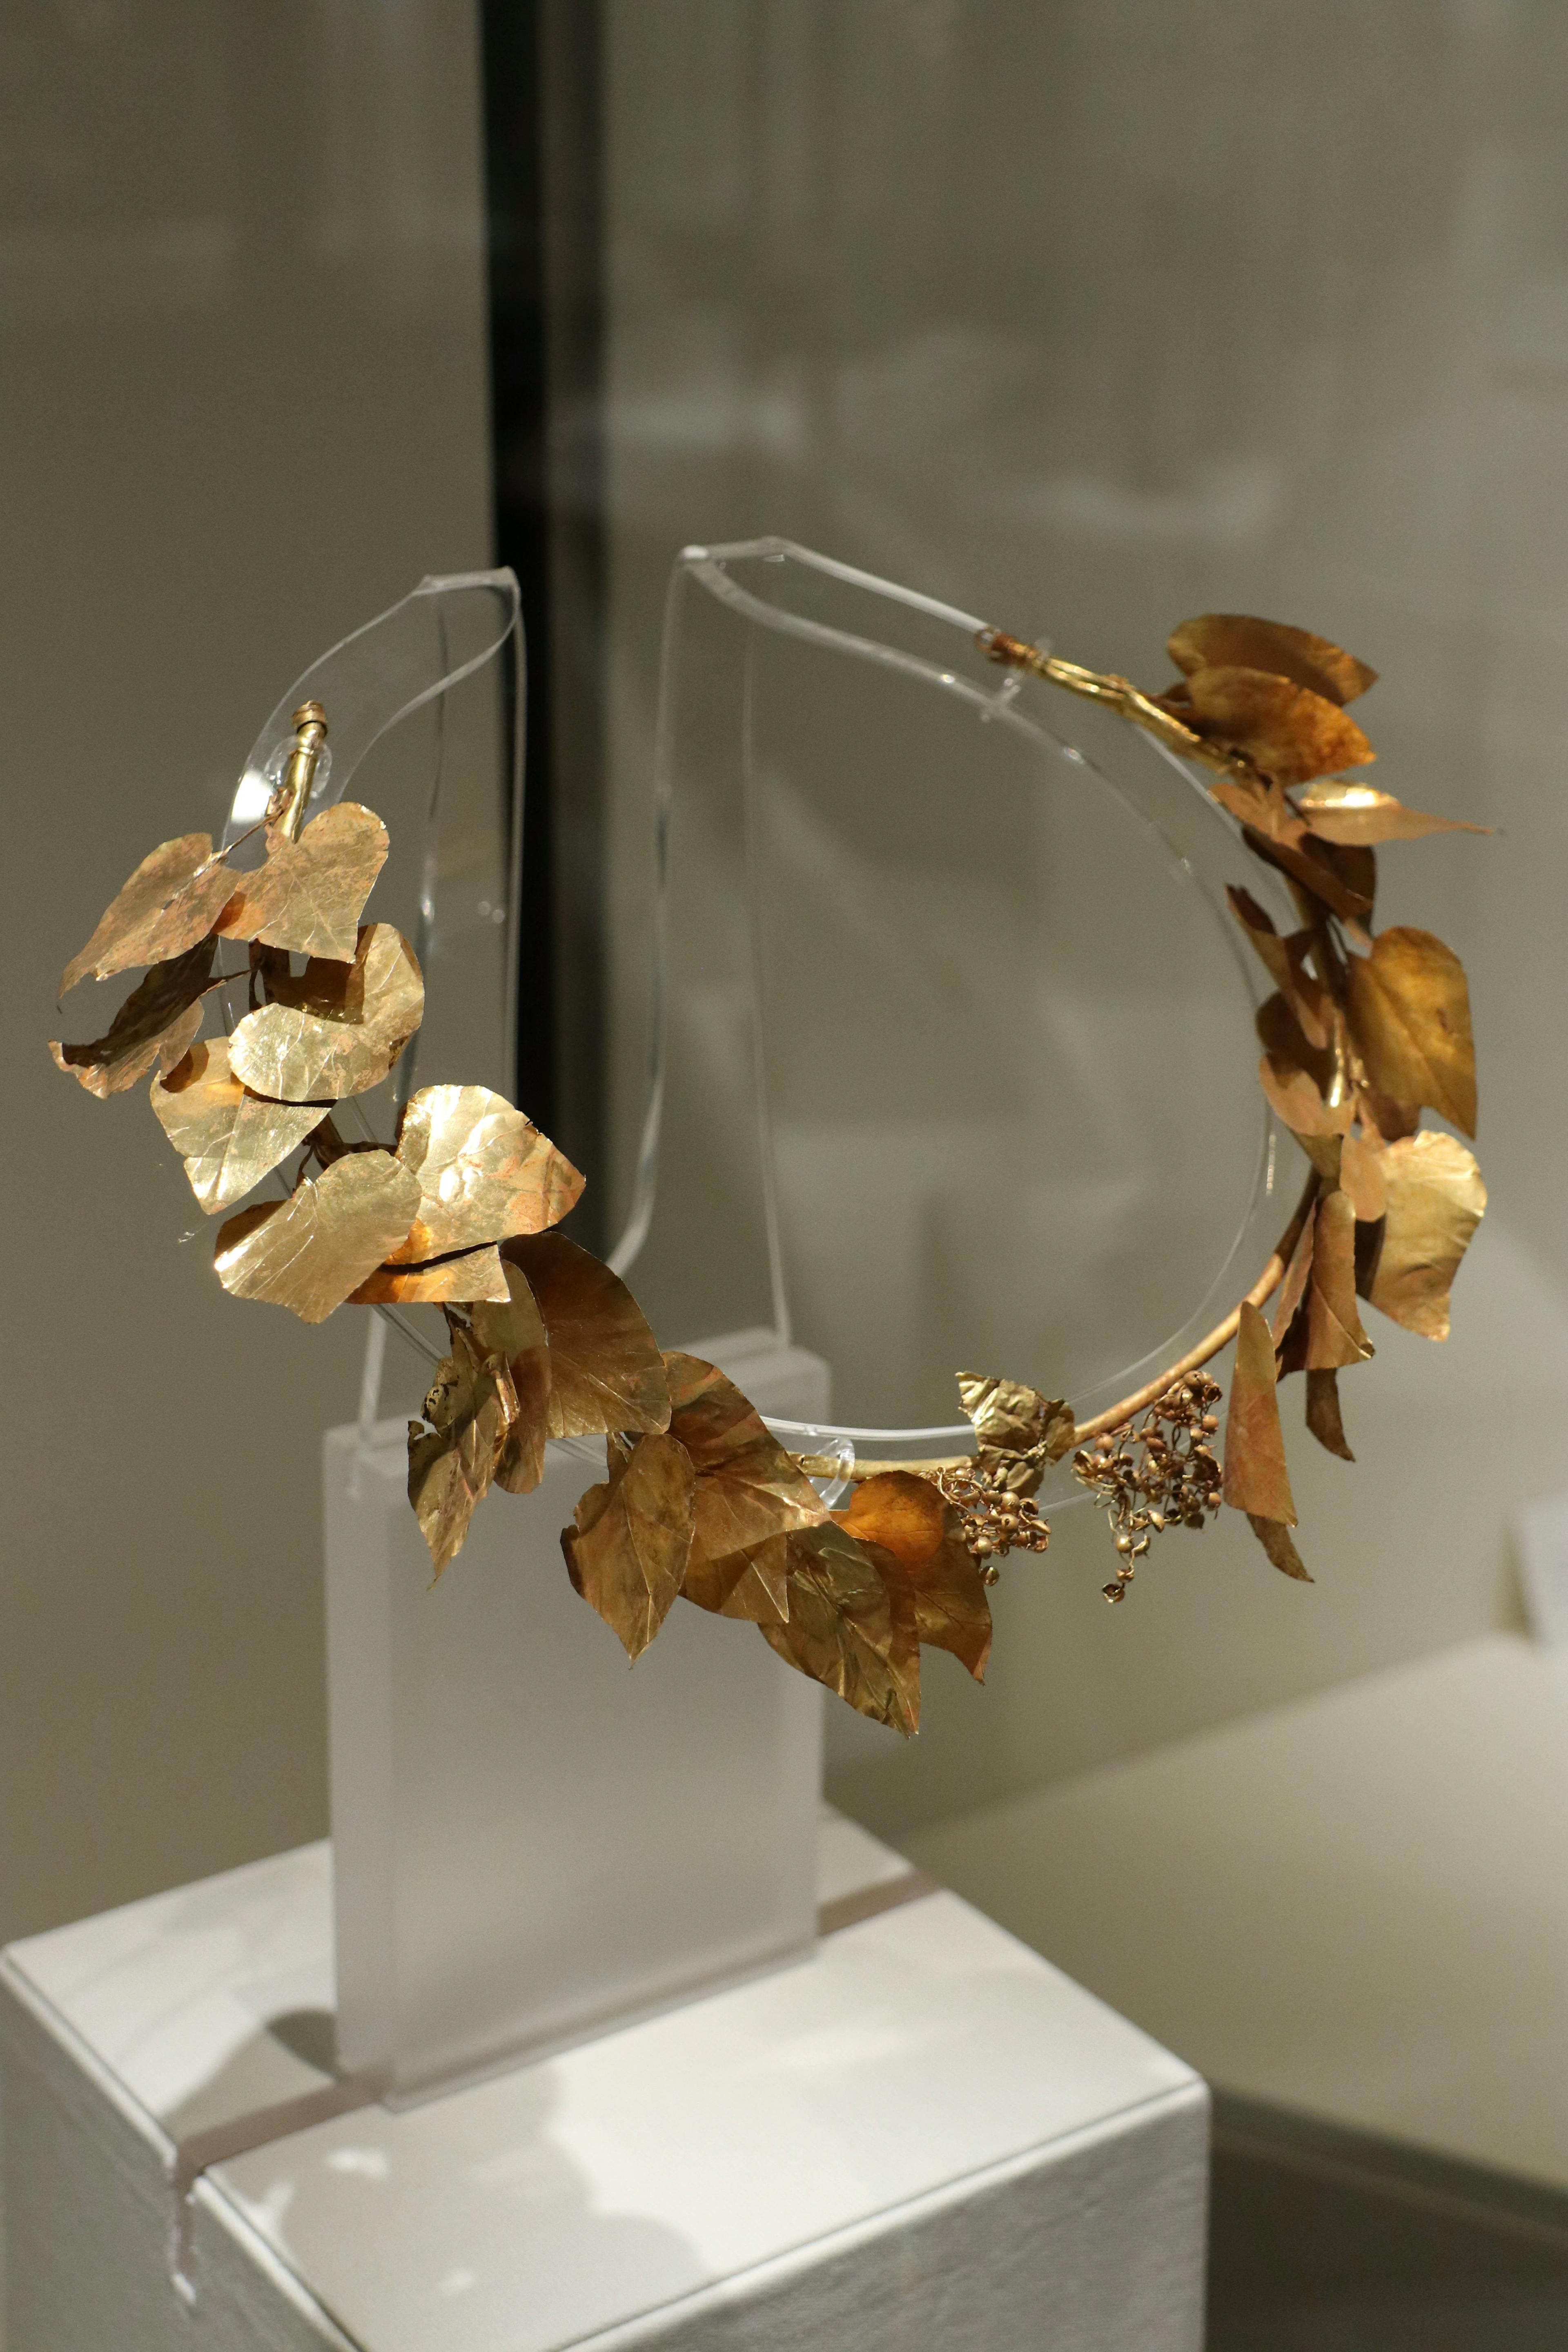 Gold ivy wreath from the middle of the 4th century B.C. On display at the National Archaeological Museum of Athens. Credit: George E. Koronaios, CC0, via Wikimedia Commons.